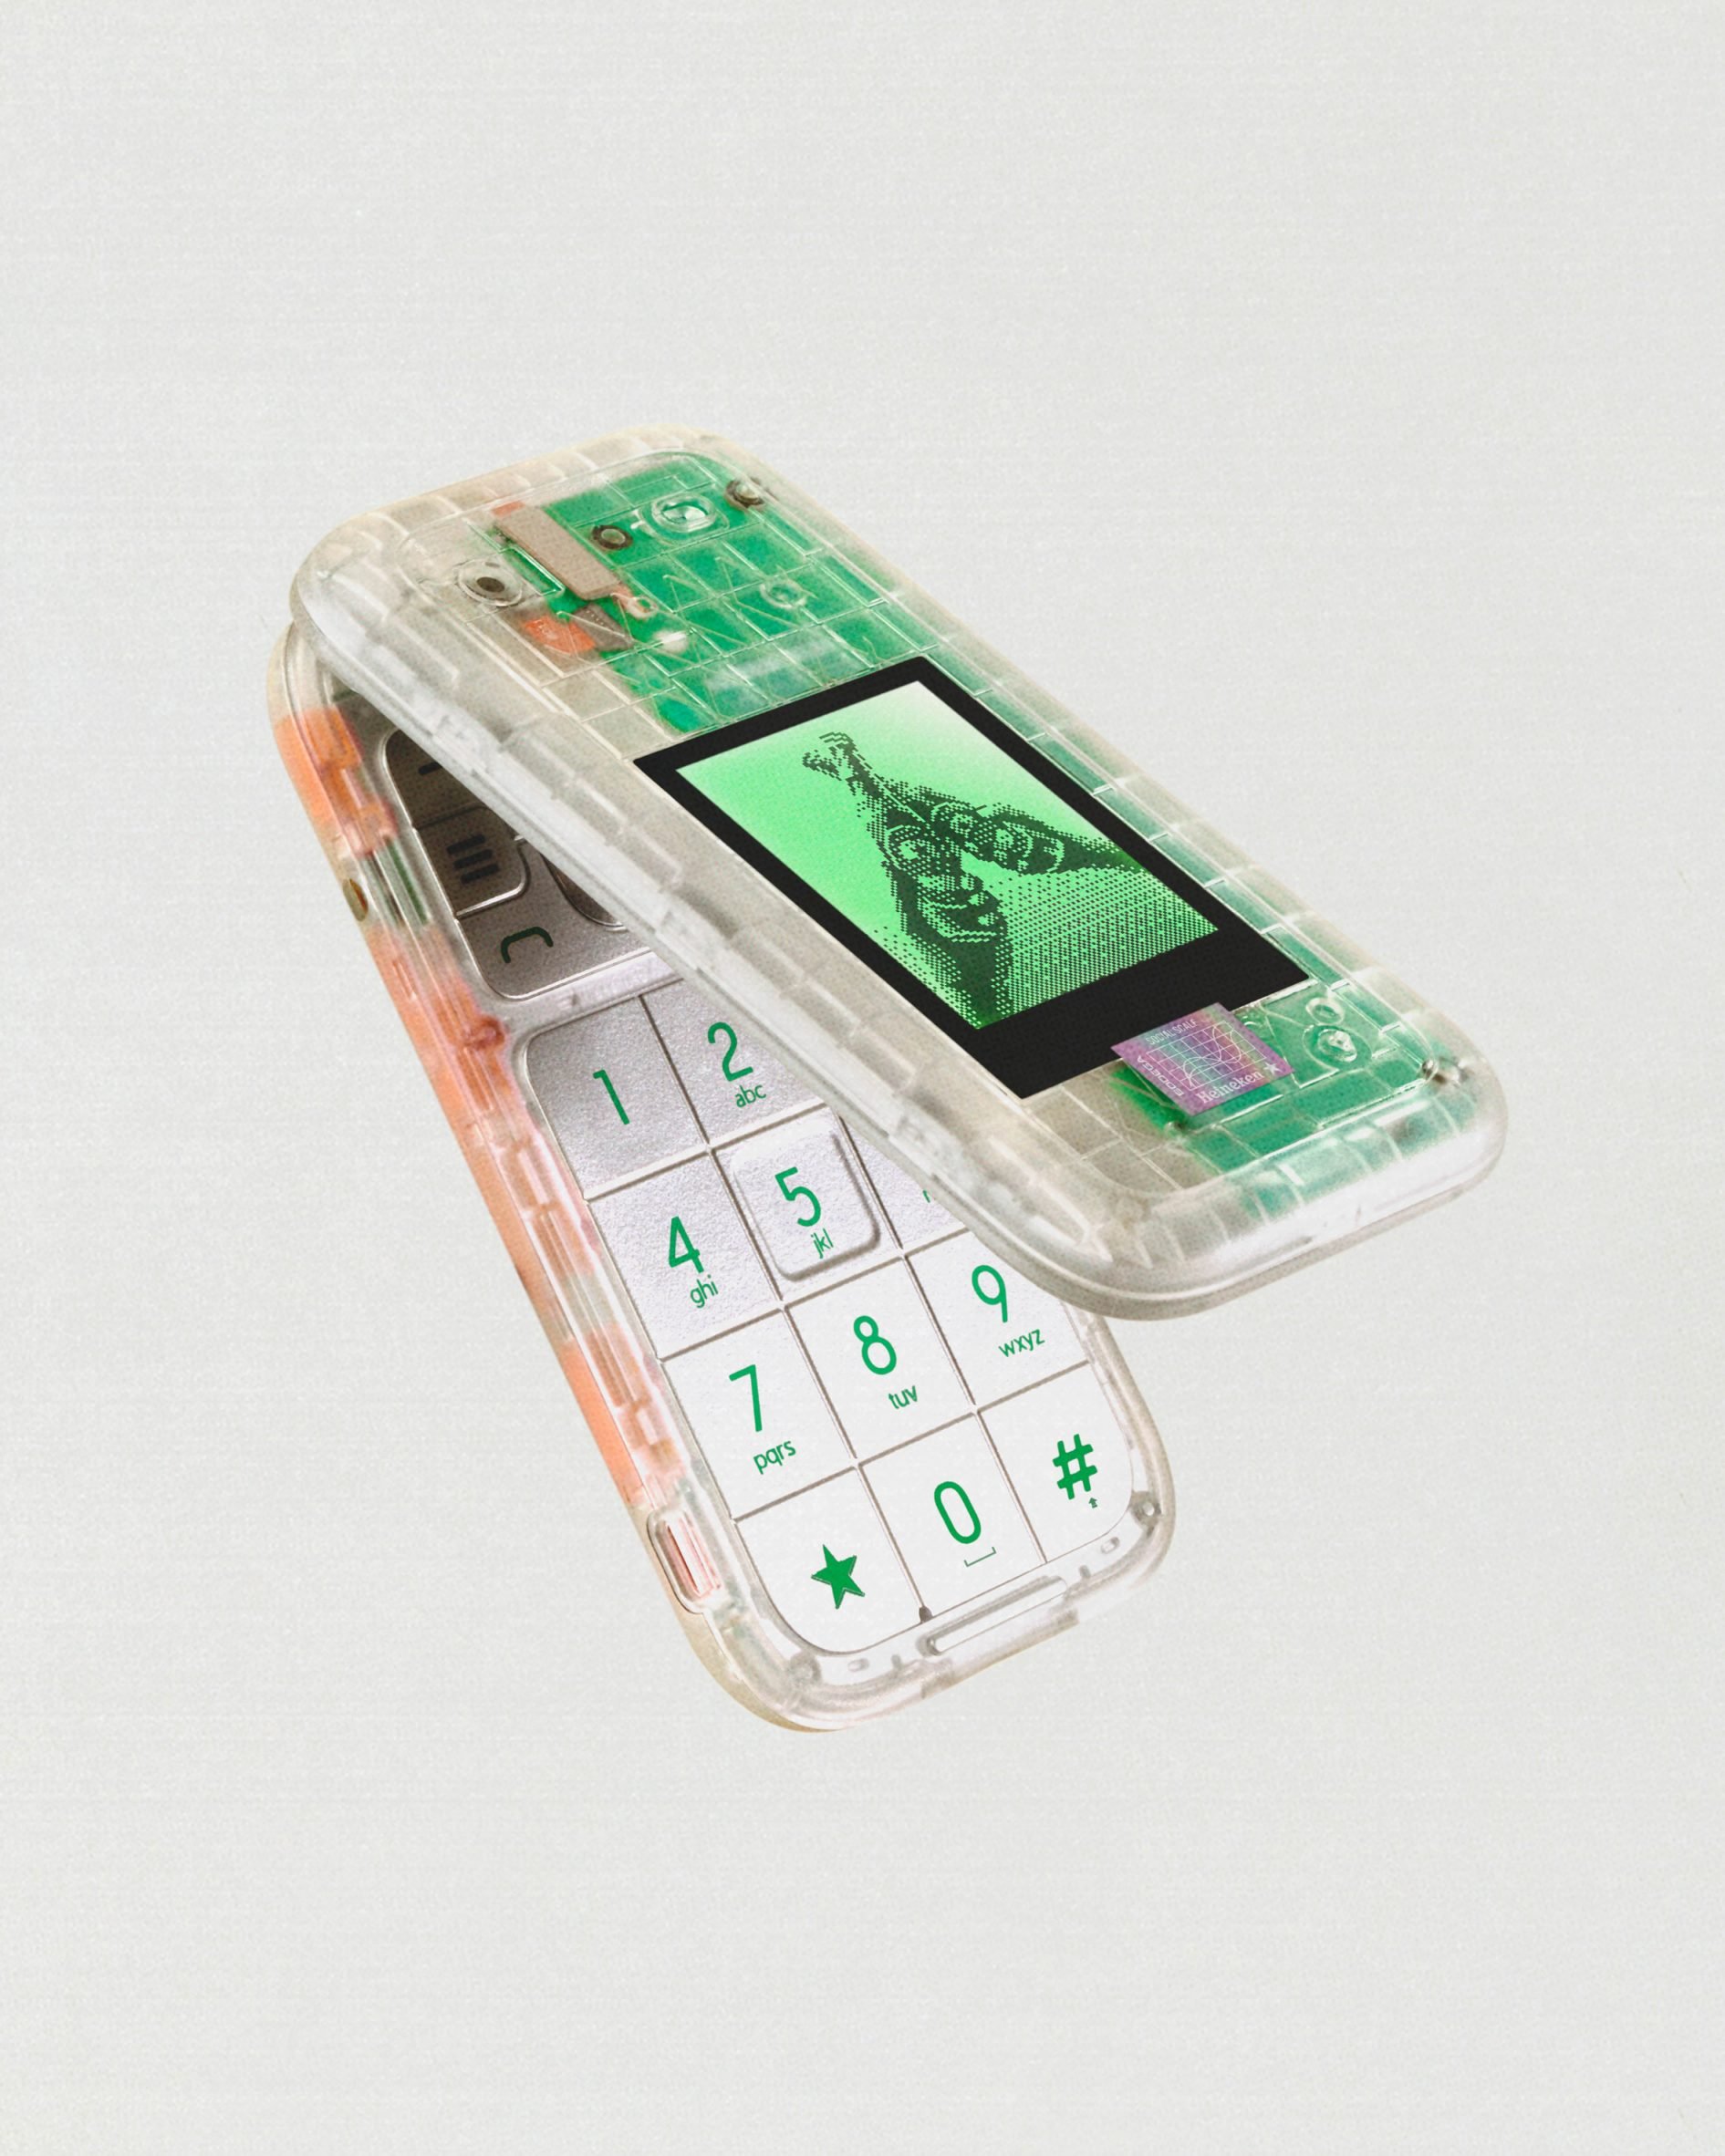 The Boring Phone launched at Milan Design Week